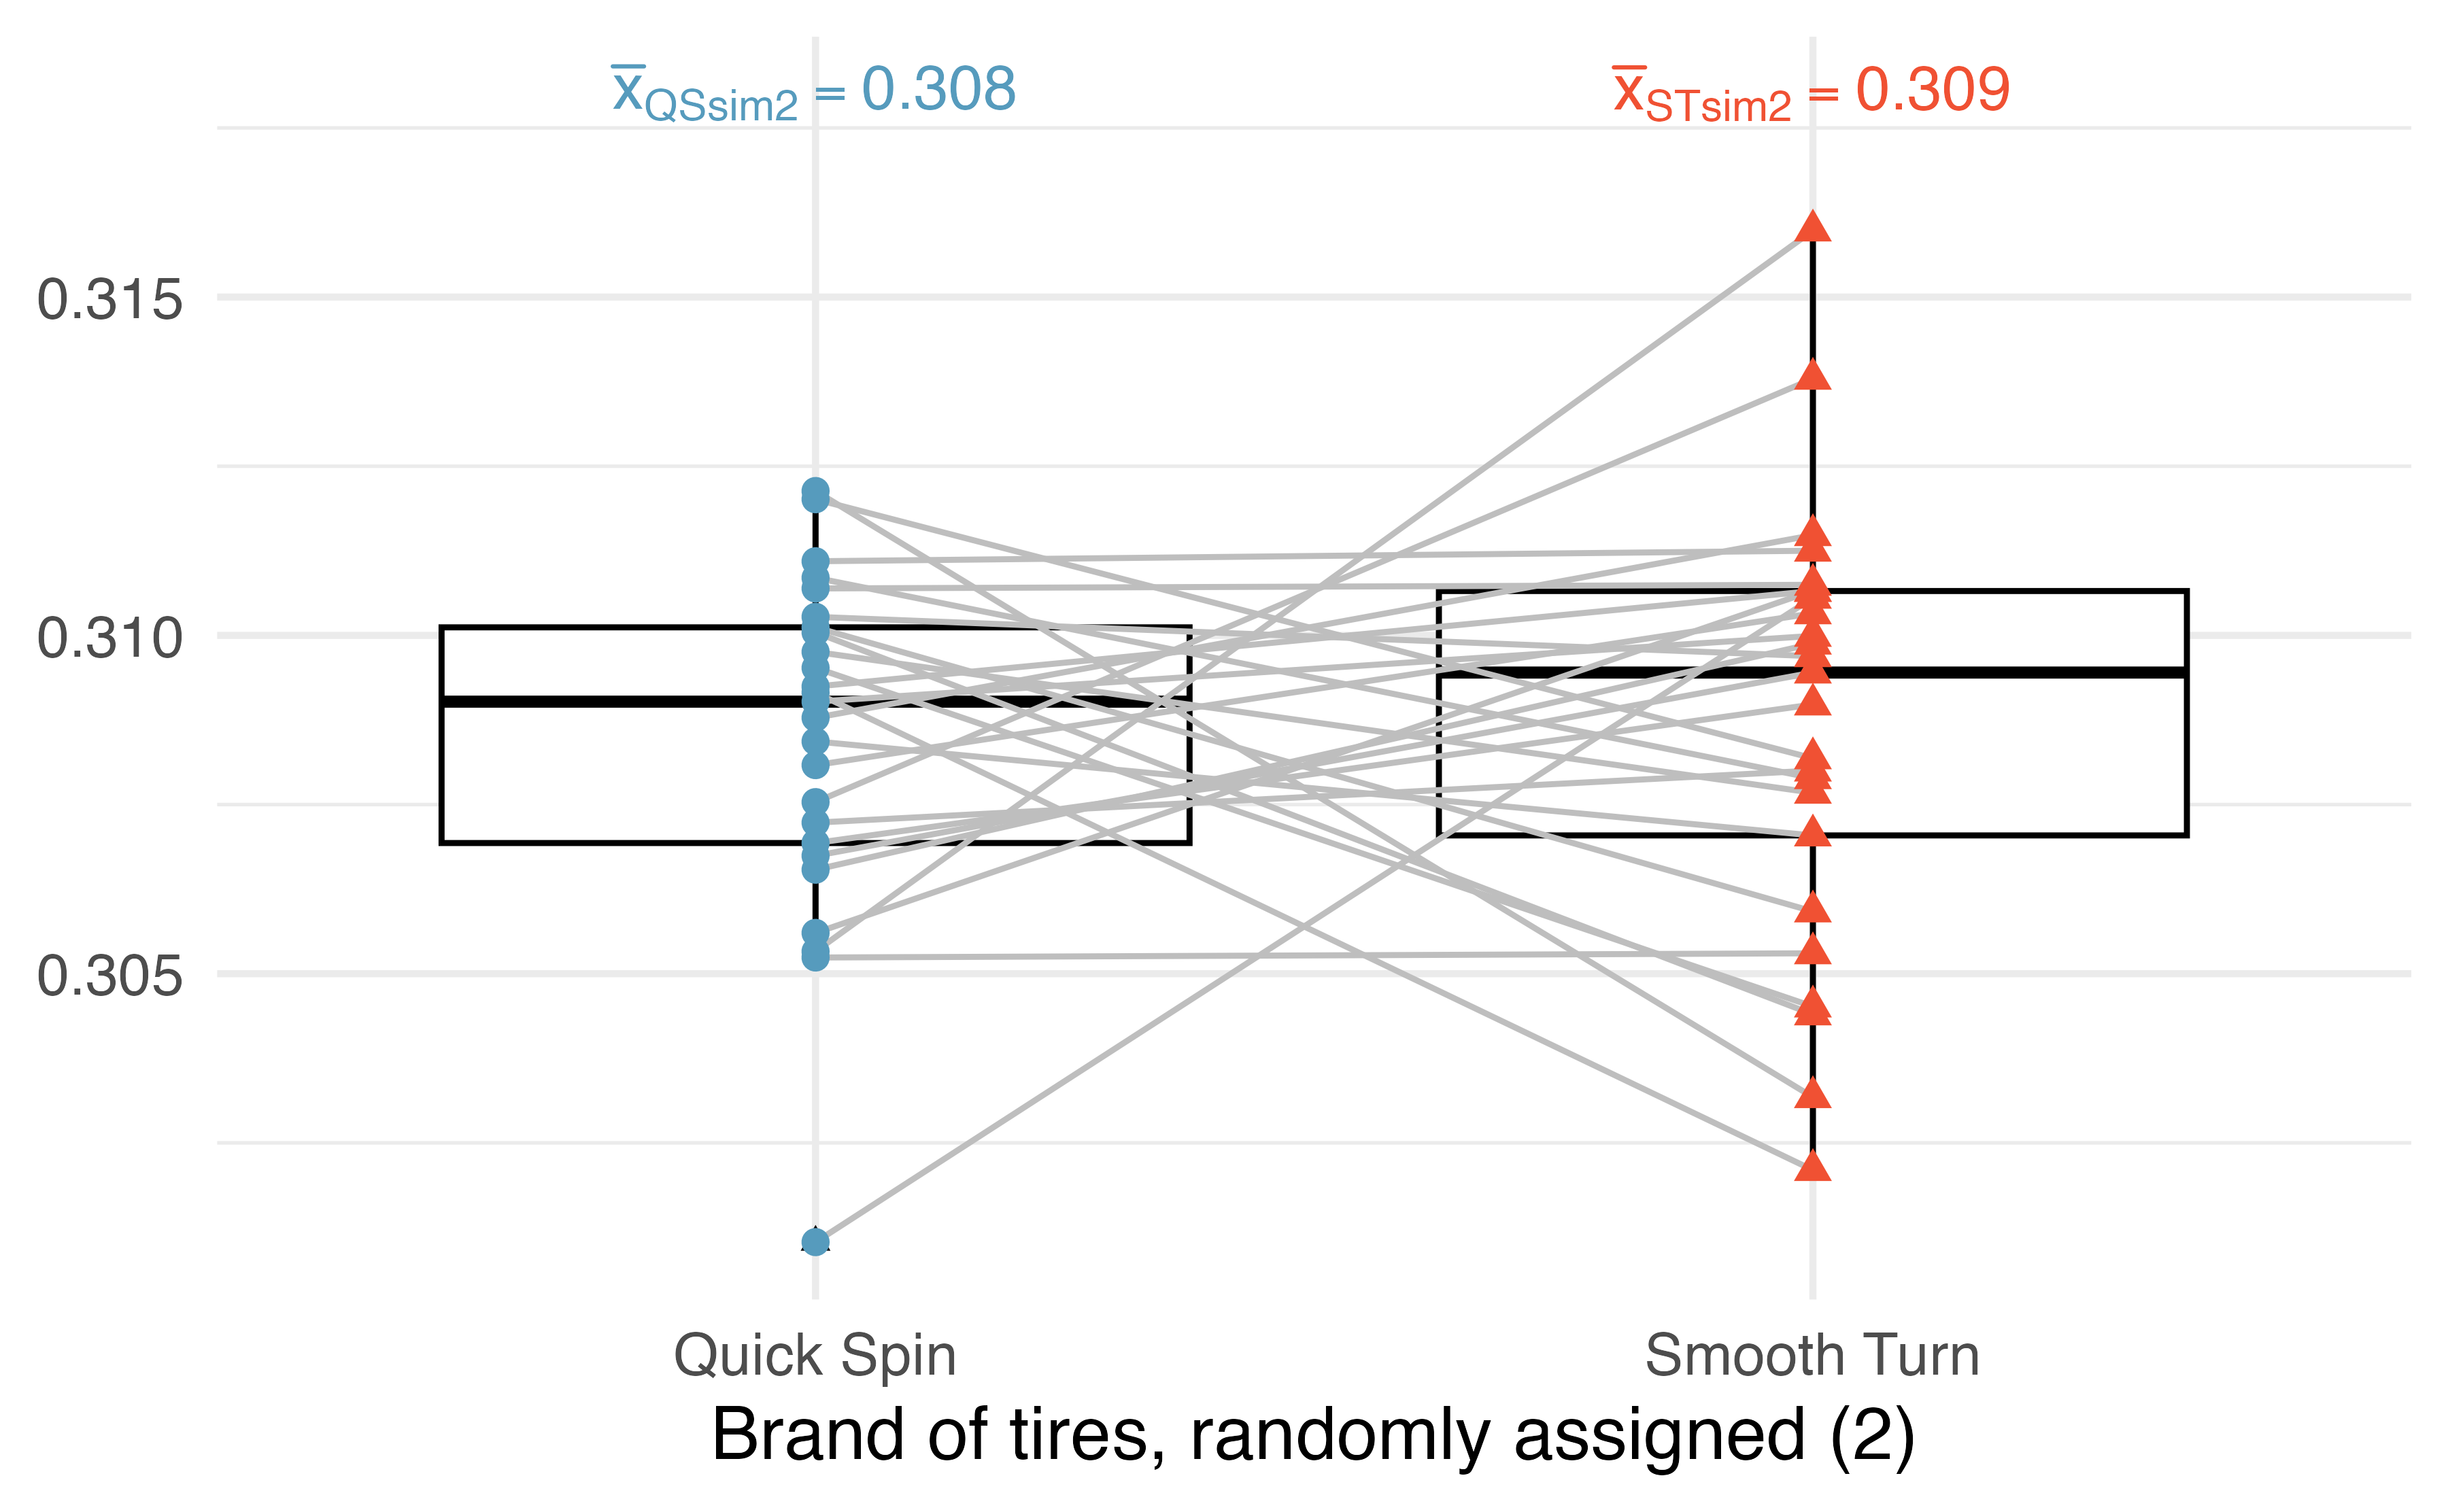 Boxplots and scatterplot with tire brand on the x-axis and treat on the y-axis. The points are assigned to the x-axis brand given by the permutation, but the plot differs from previous figures in that it is a second permutation of the brands. Again, the two permuted brands seem equivalent with respect to tire wear.